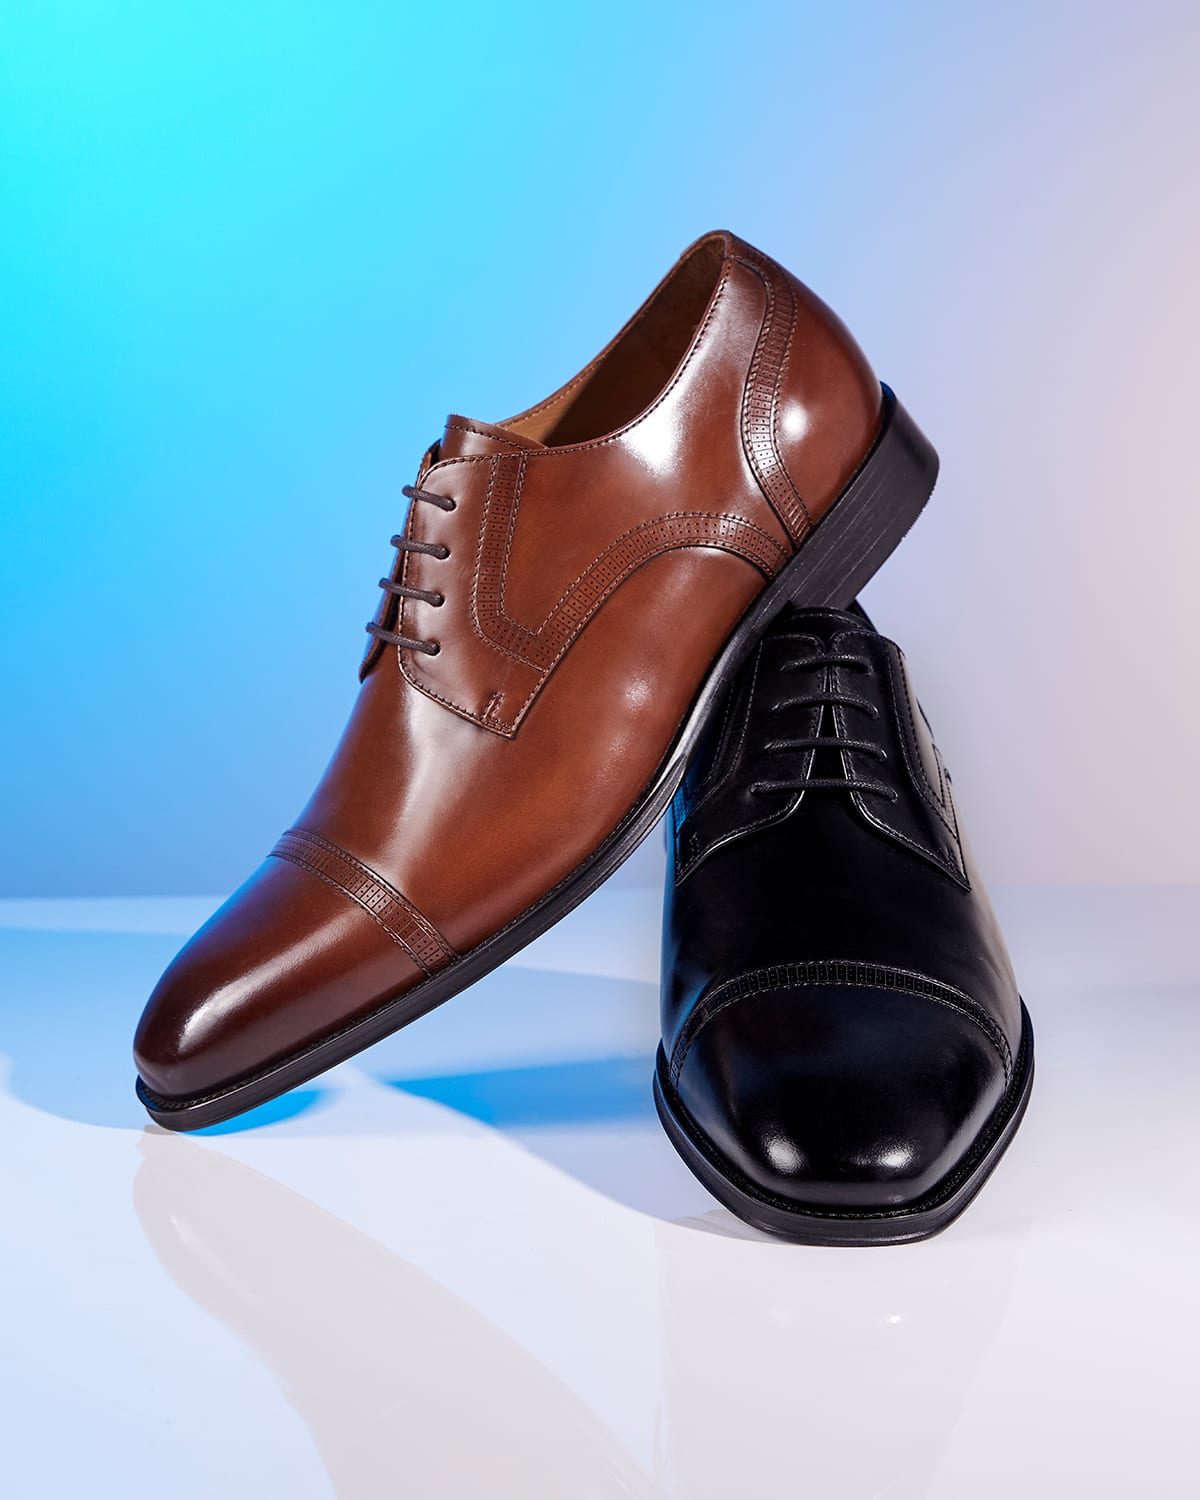 Dune London SS24 Men's City Smart Salone shoes in black and brown